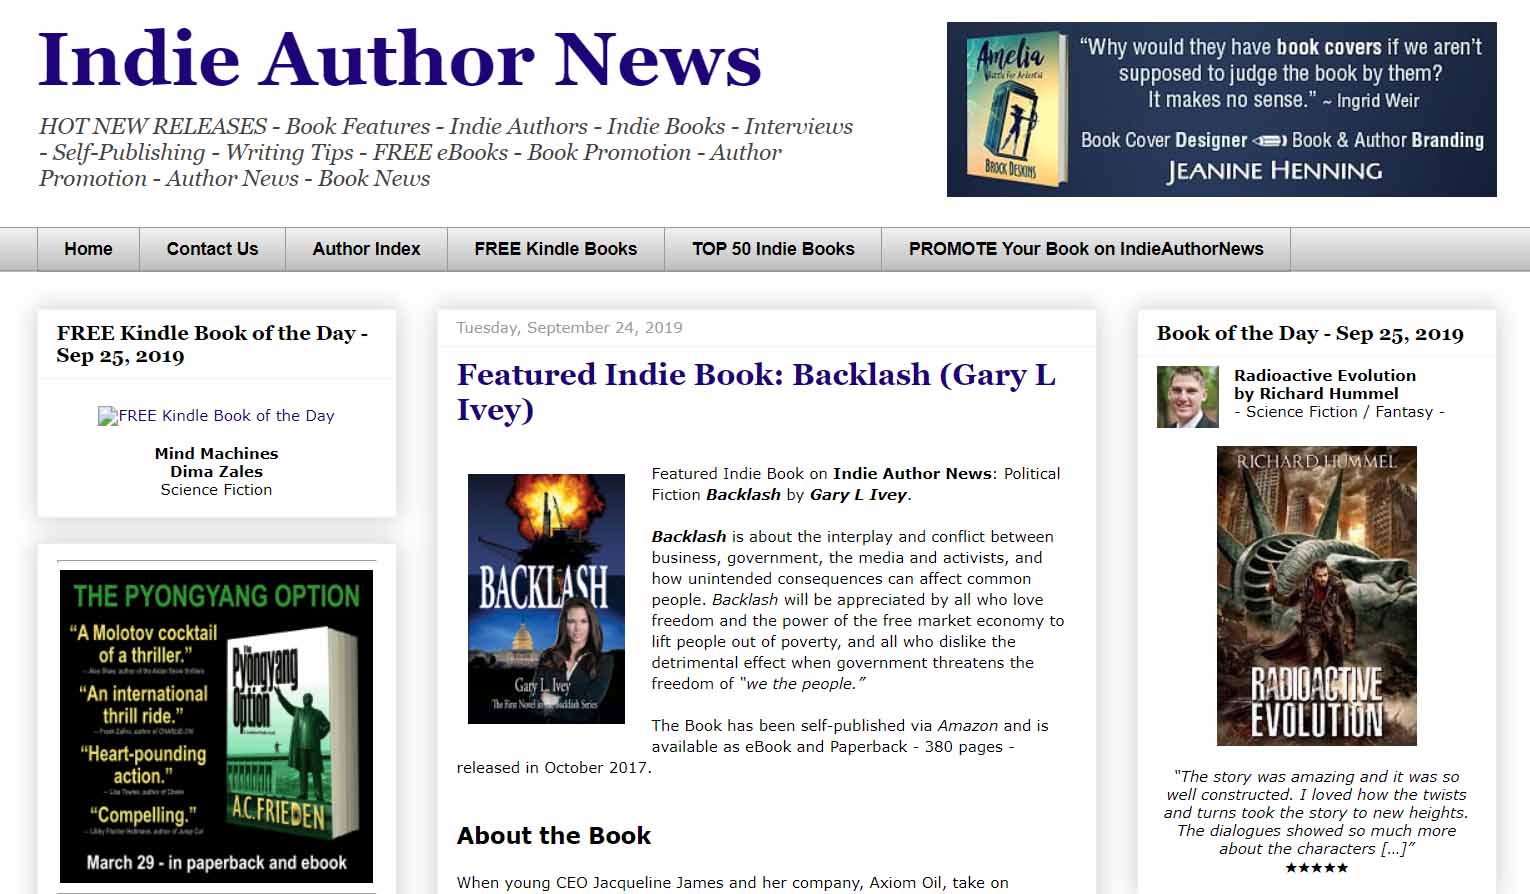 Indie Author News Features Backlash